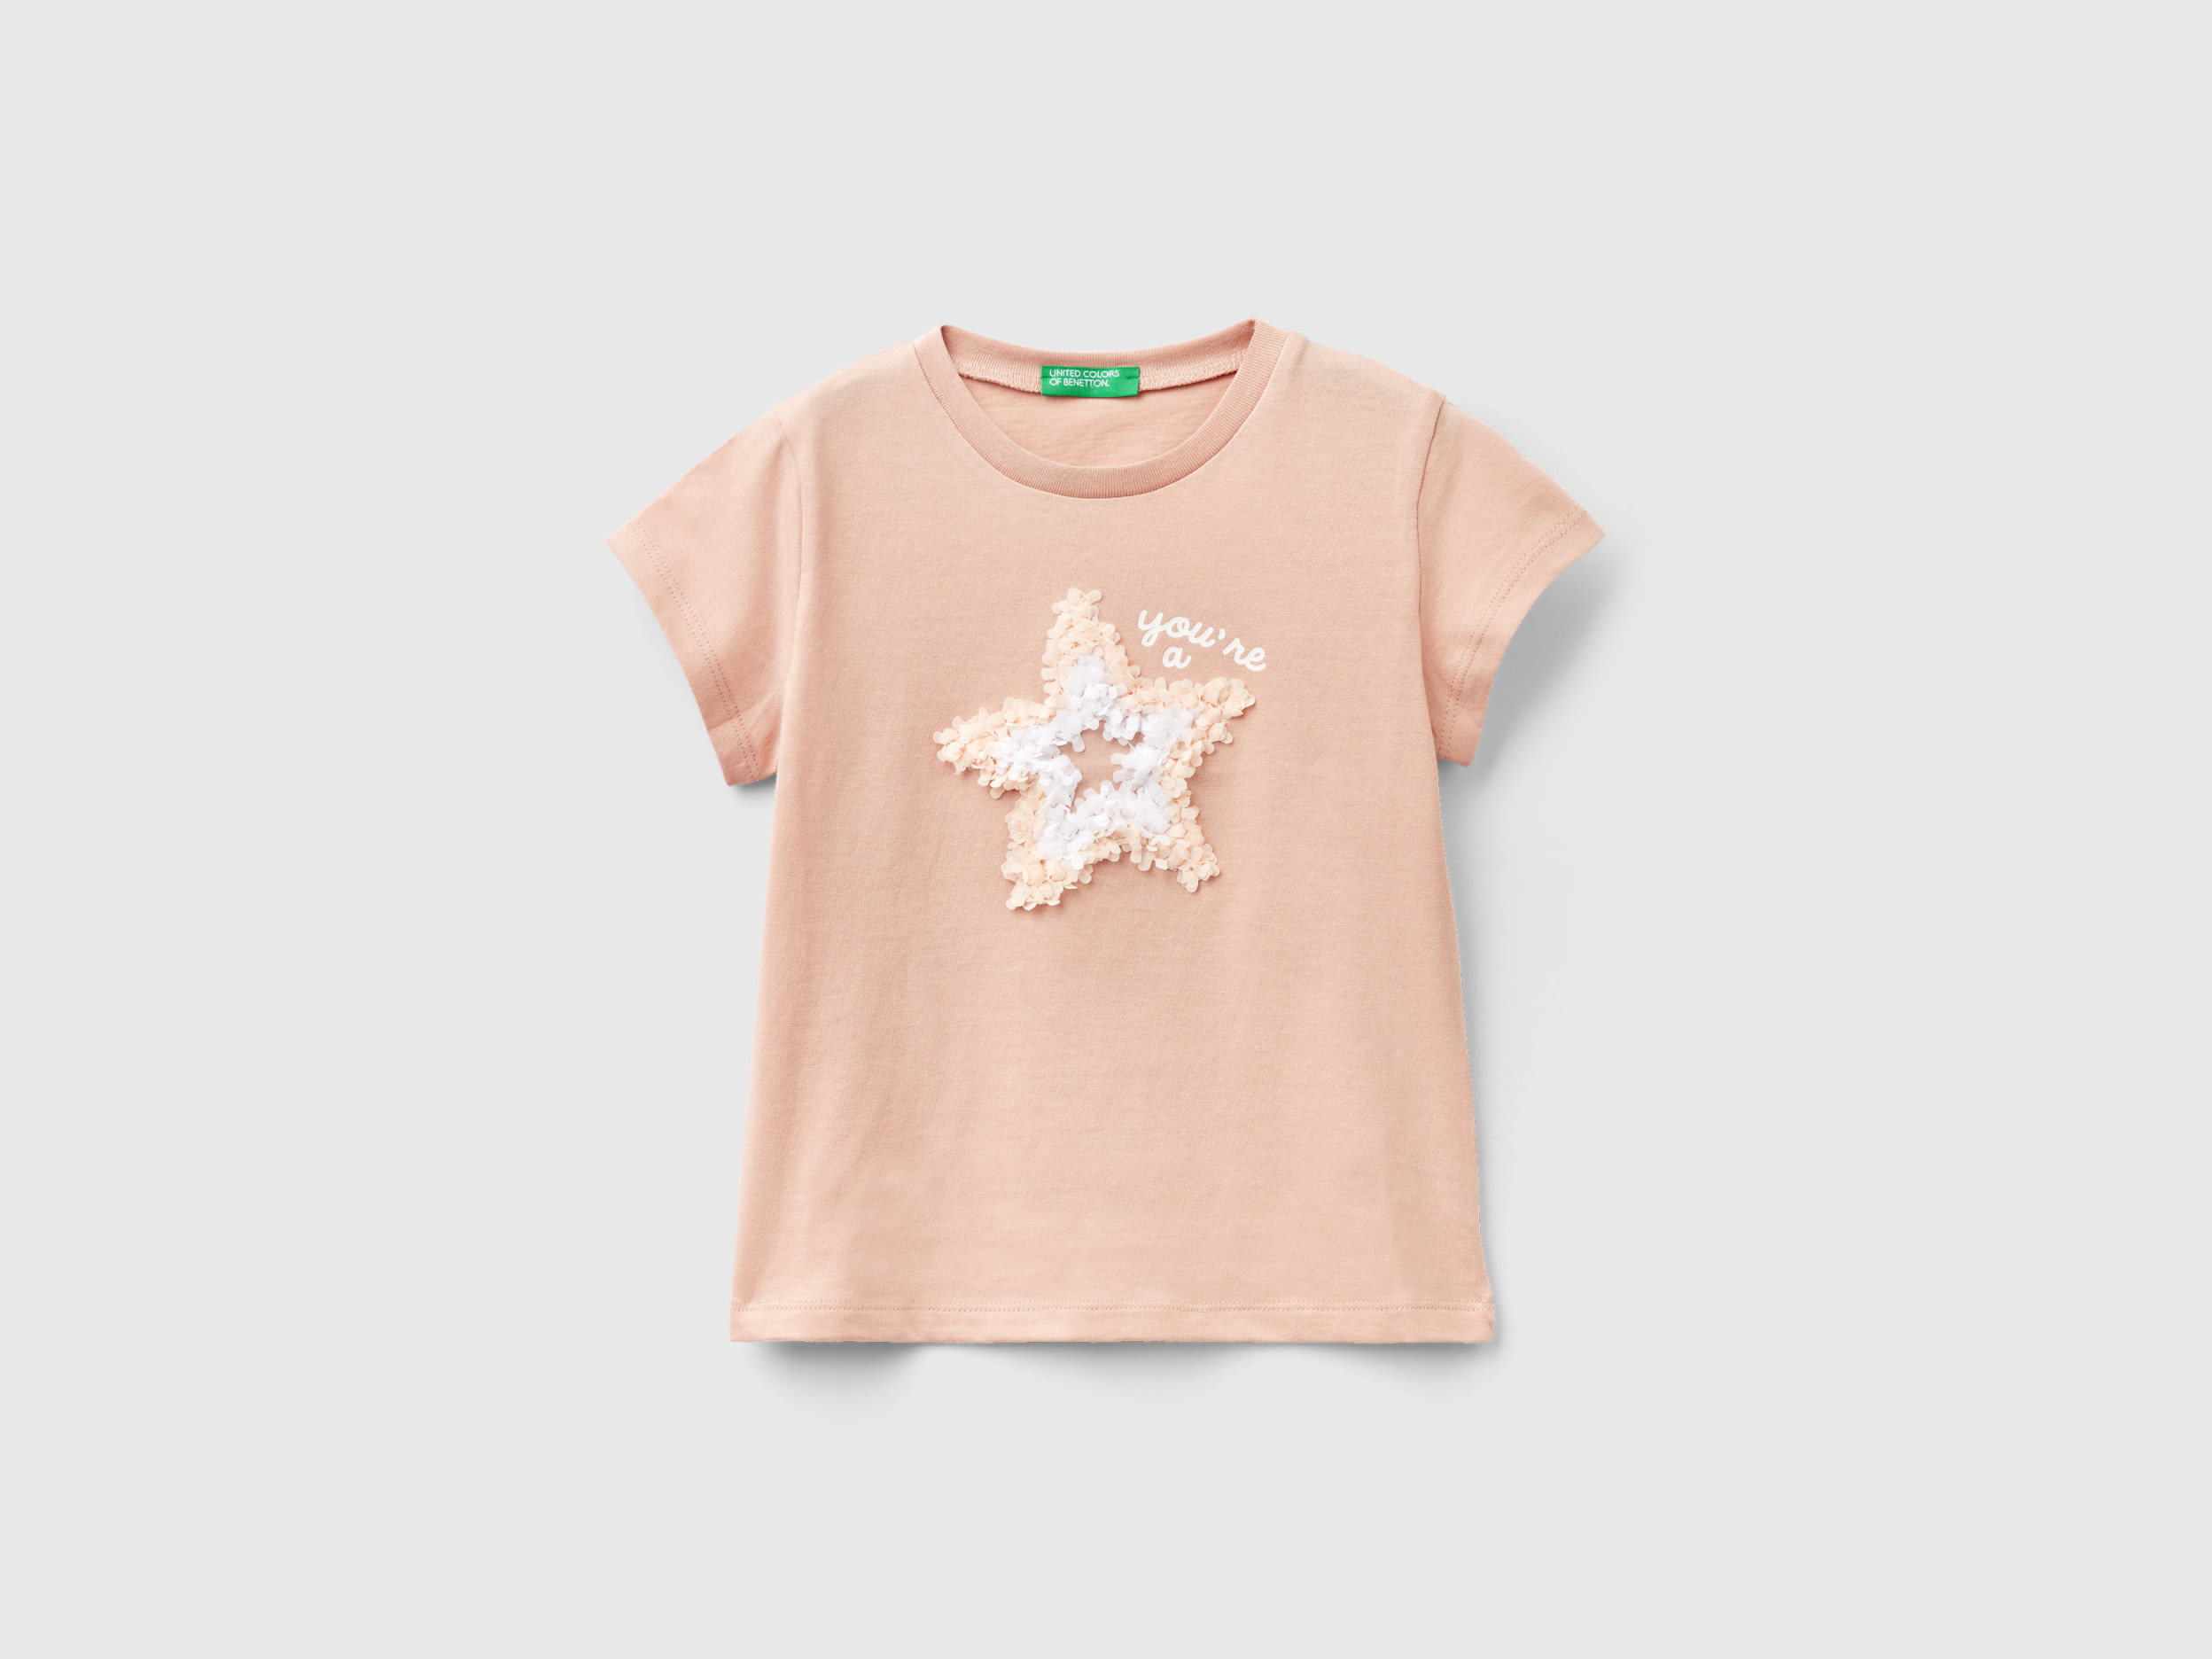 Image of Benetton, T-shirt With Petal Effect Applique, size 98, Soft Pink, Kids